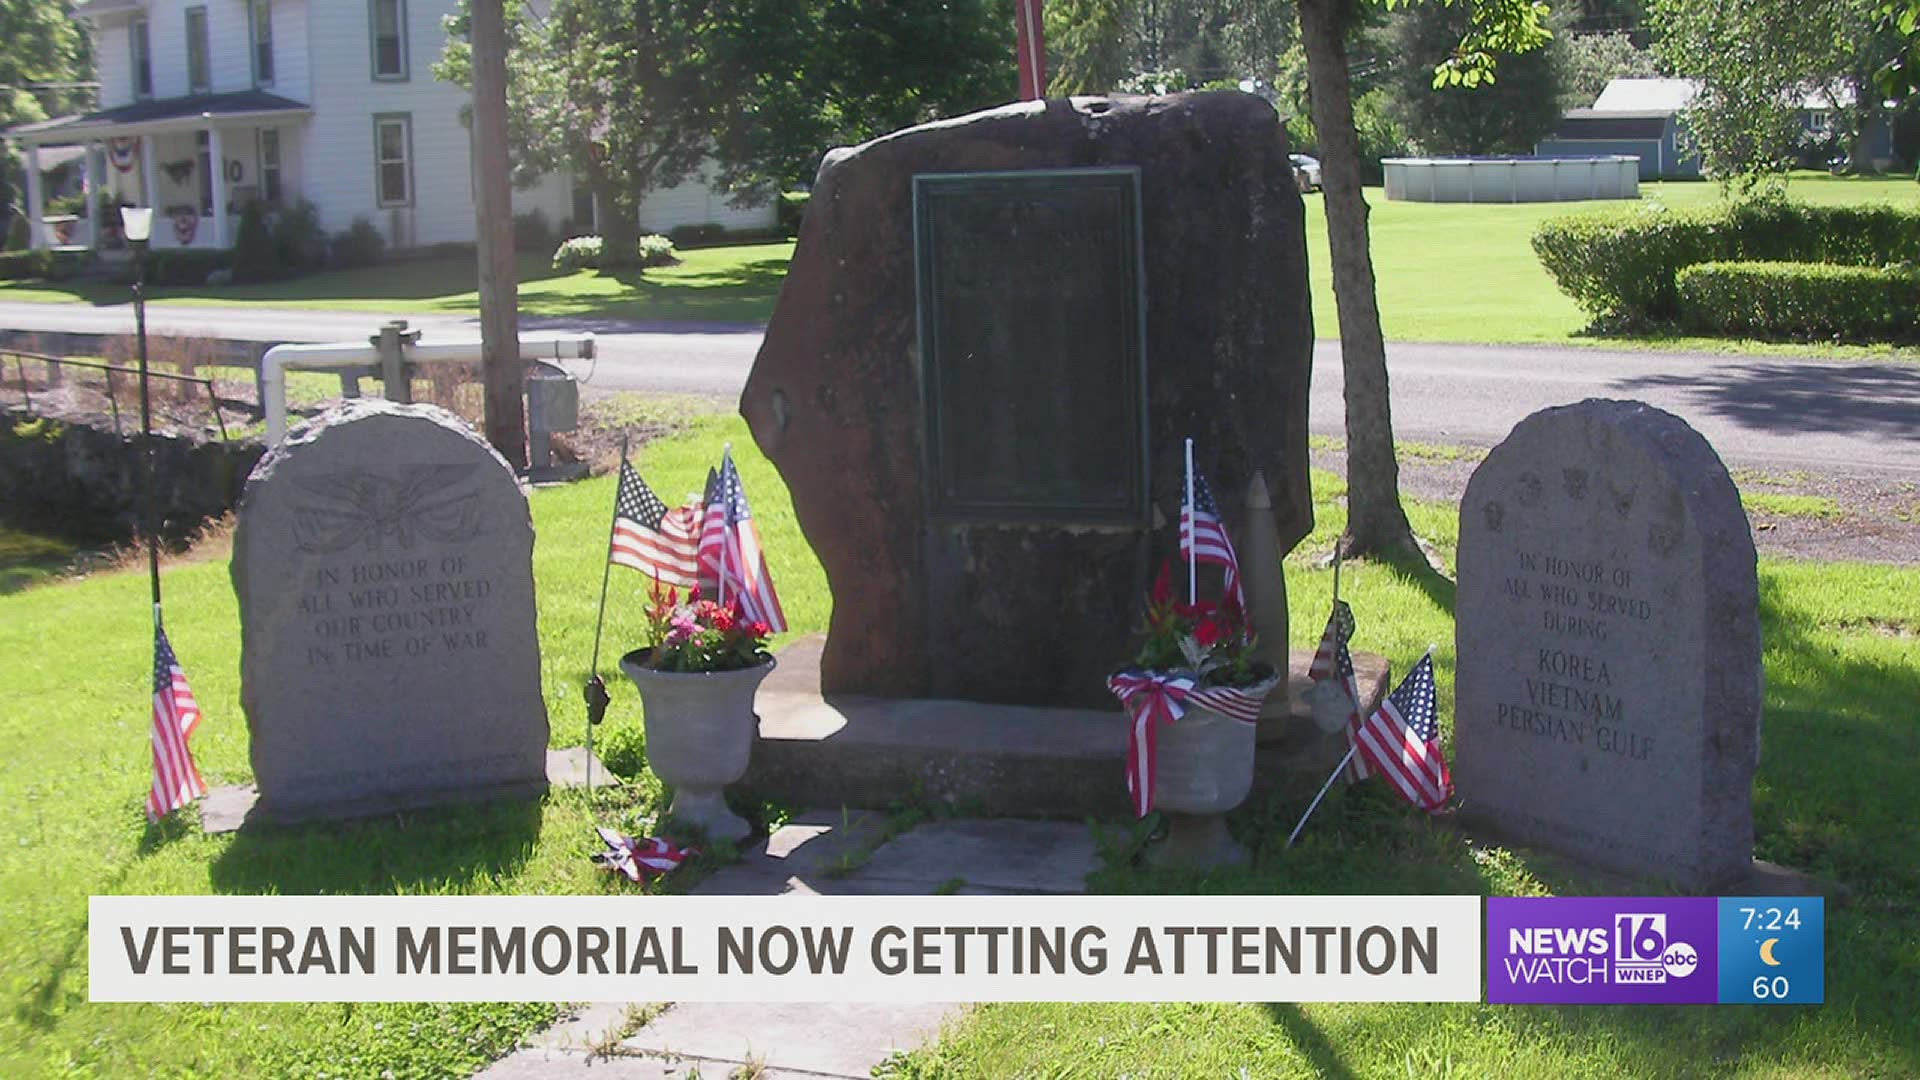 A new veteran memorial is on display in Porter Township.